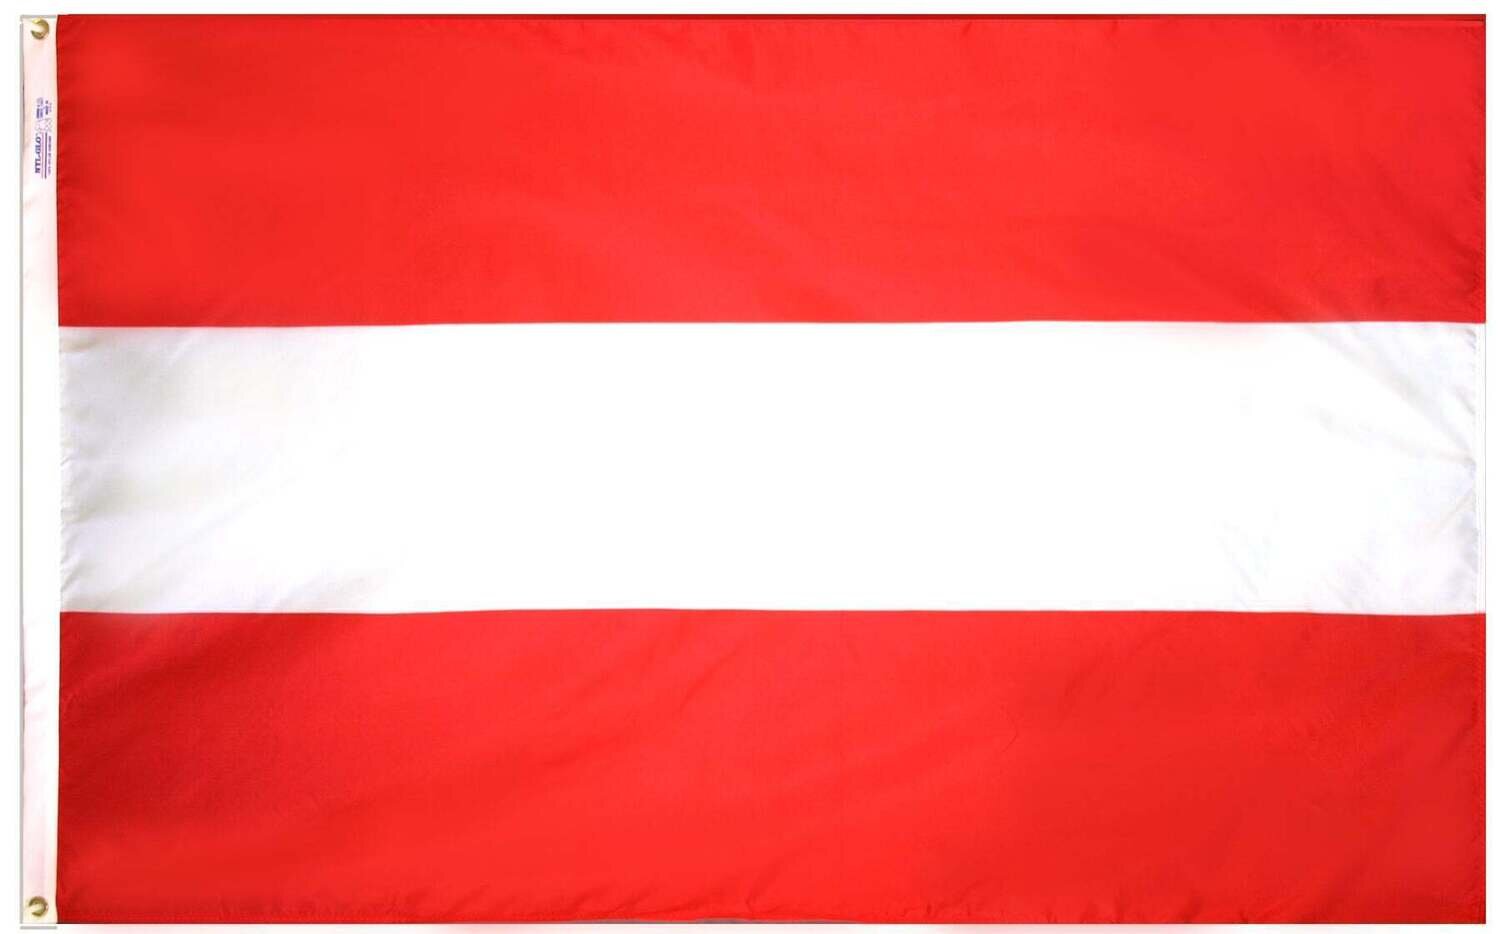 Austria Flag 3x5 ft. Nylon SolarGuard Nyl-Glo 100% Made in USA to Official United Nations Design Specifications.